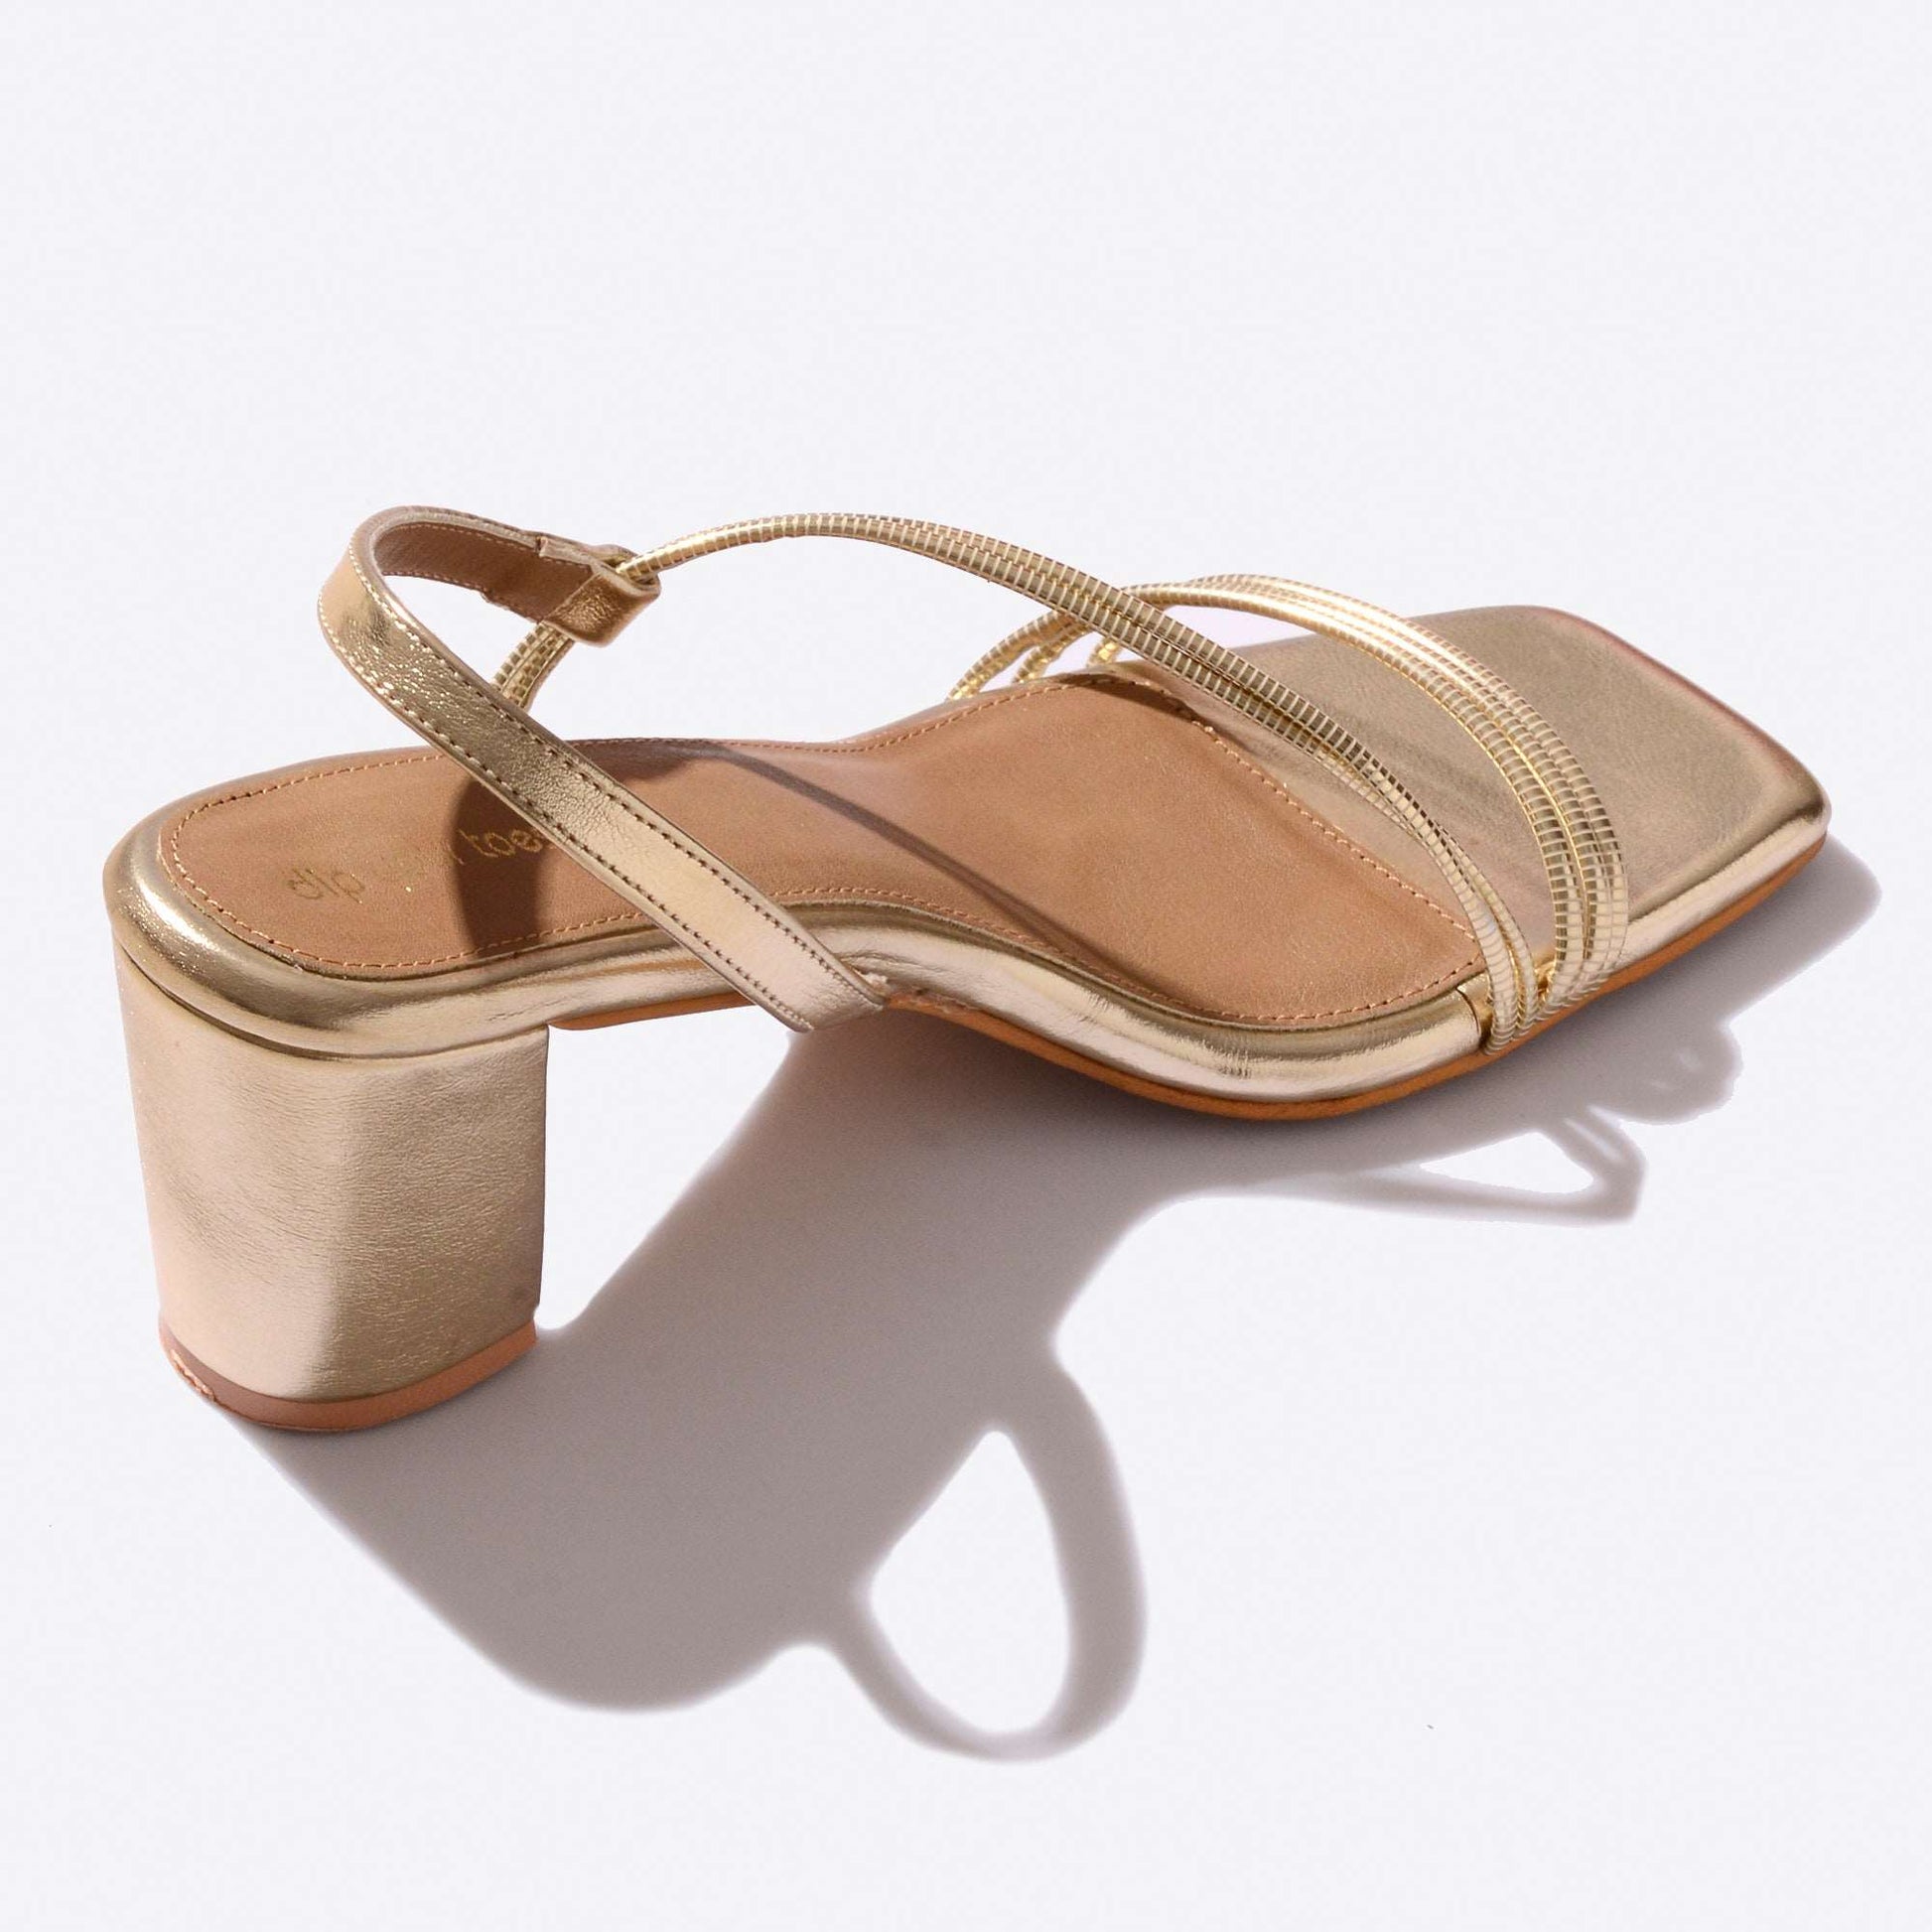 Gold Strappy Sandals